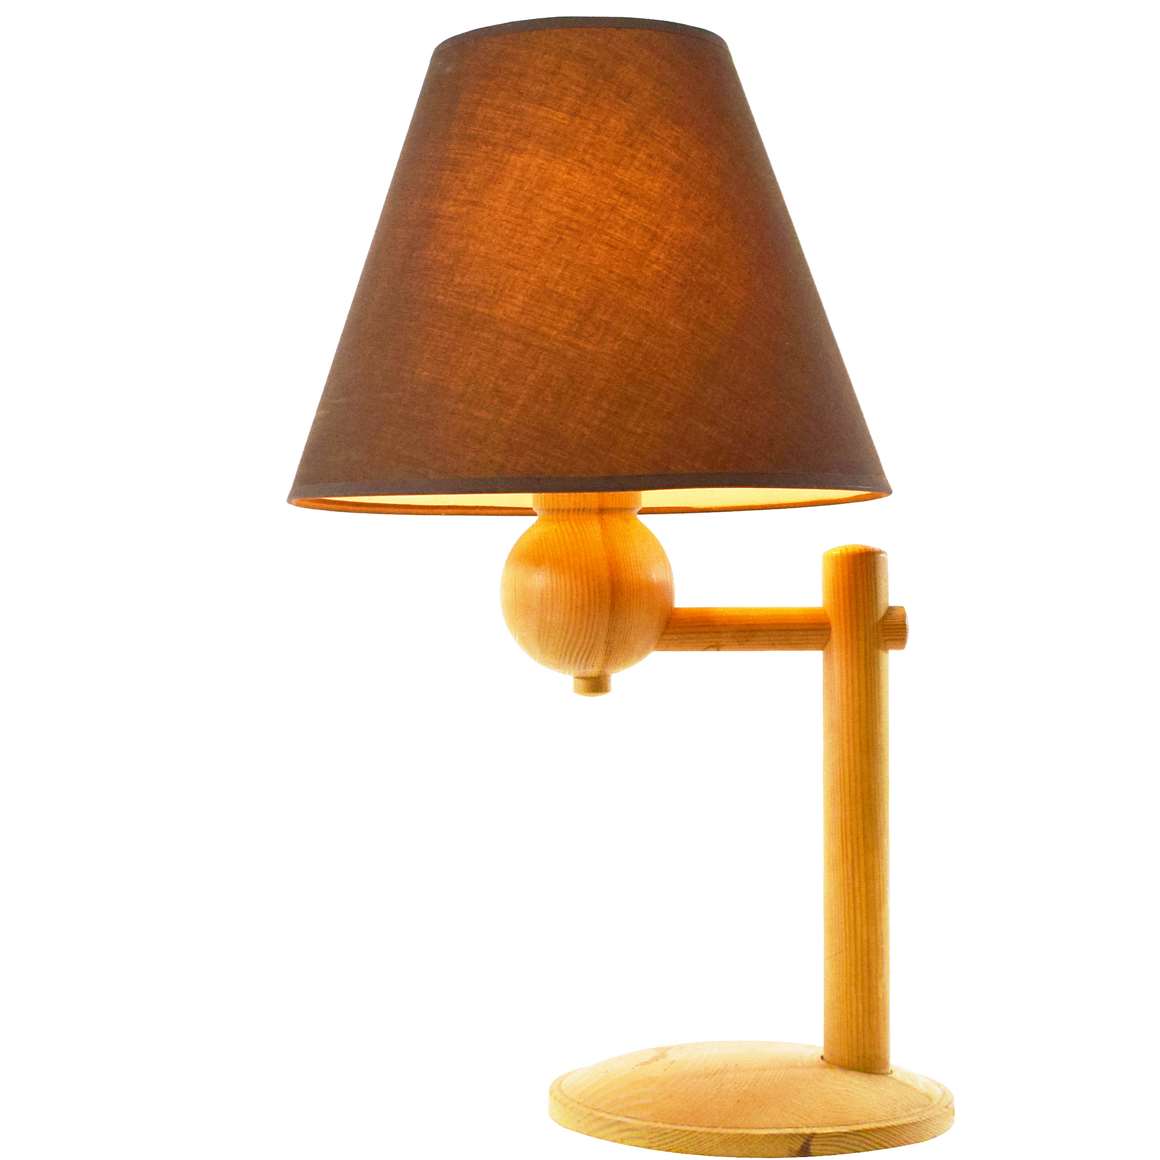 Aneta pinewood table lamps round base rods globe conical fabric lampshade 1970s 1980s Aneta Belysning Sweden